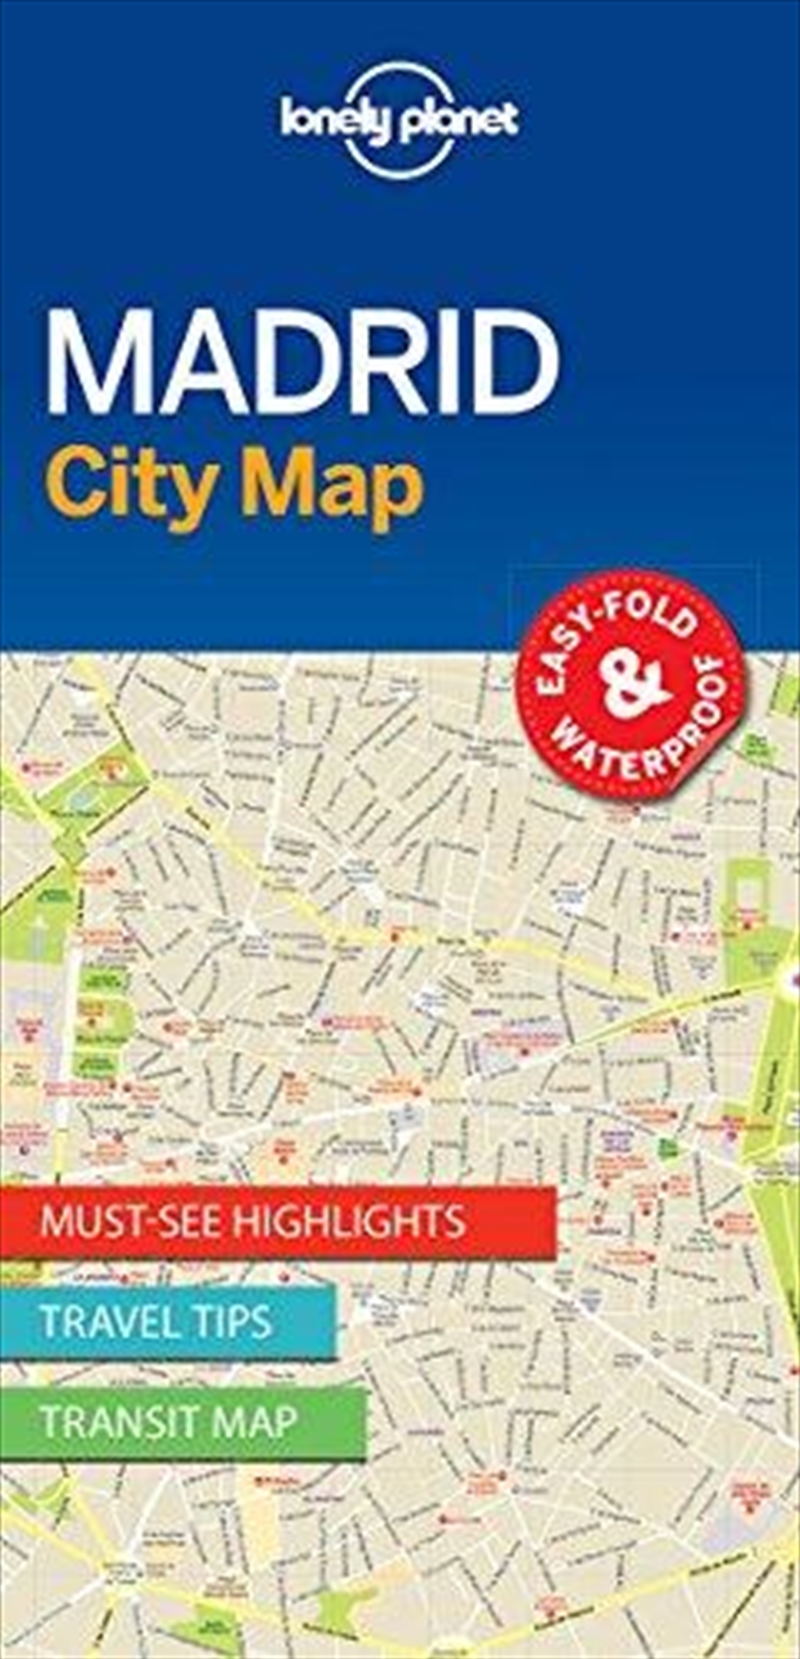 Madrid City Map: Edition 1/Product Detail/Travel & Holidays